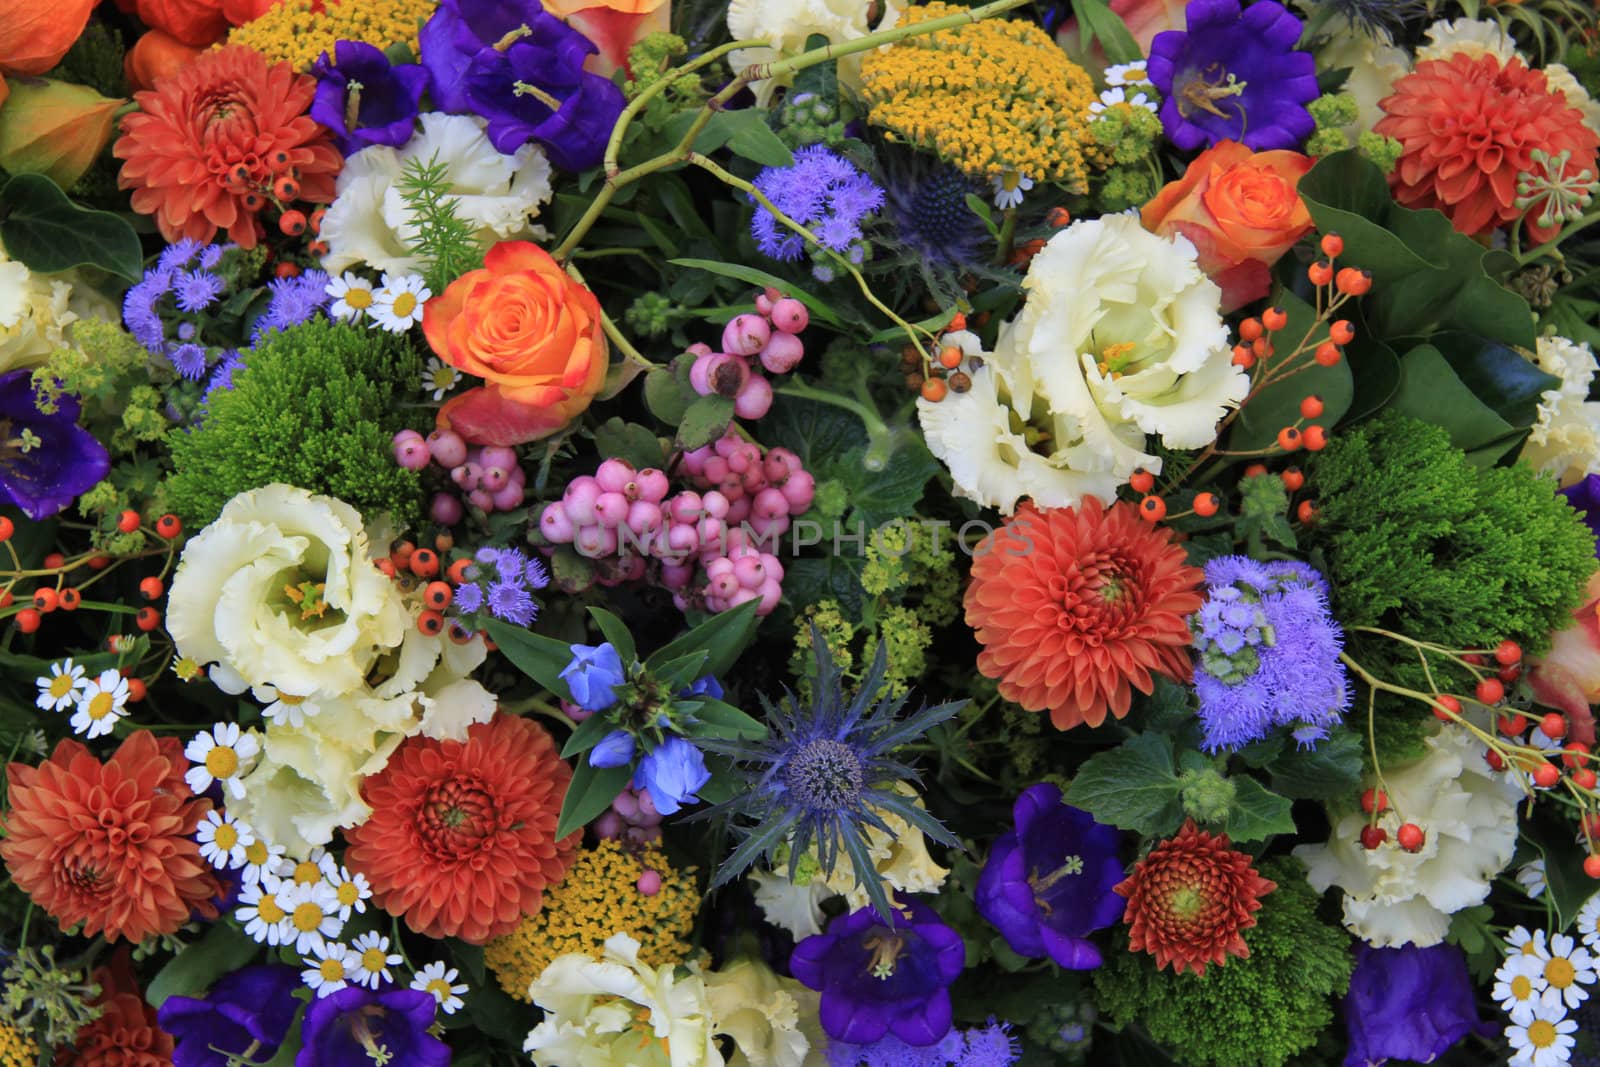 Floral arrangement with flowers and berries in bright colors